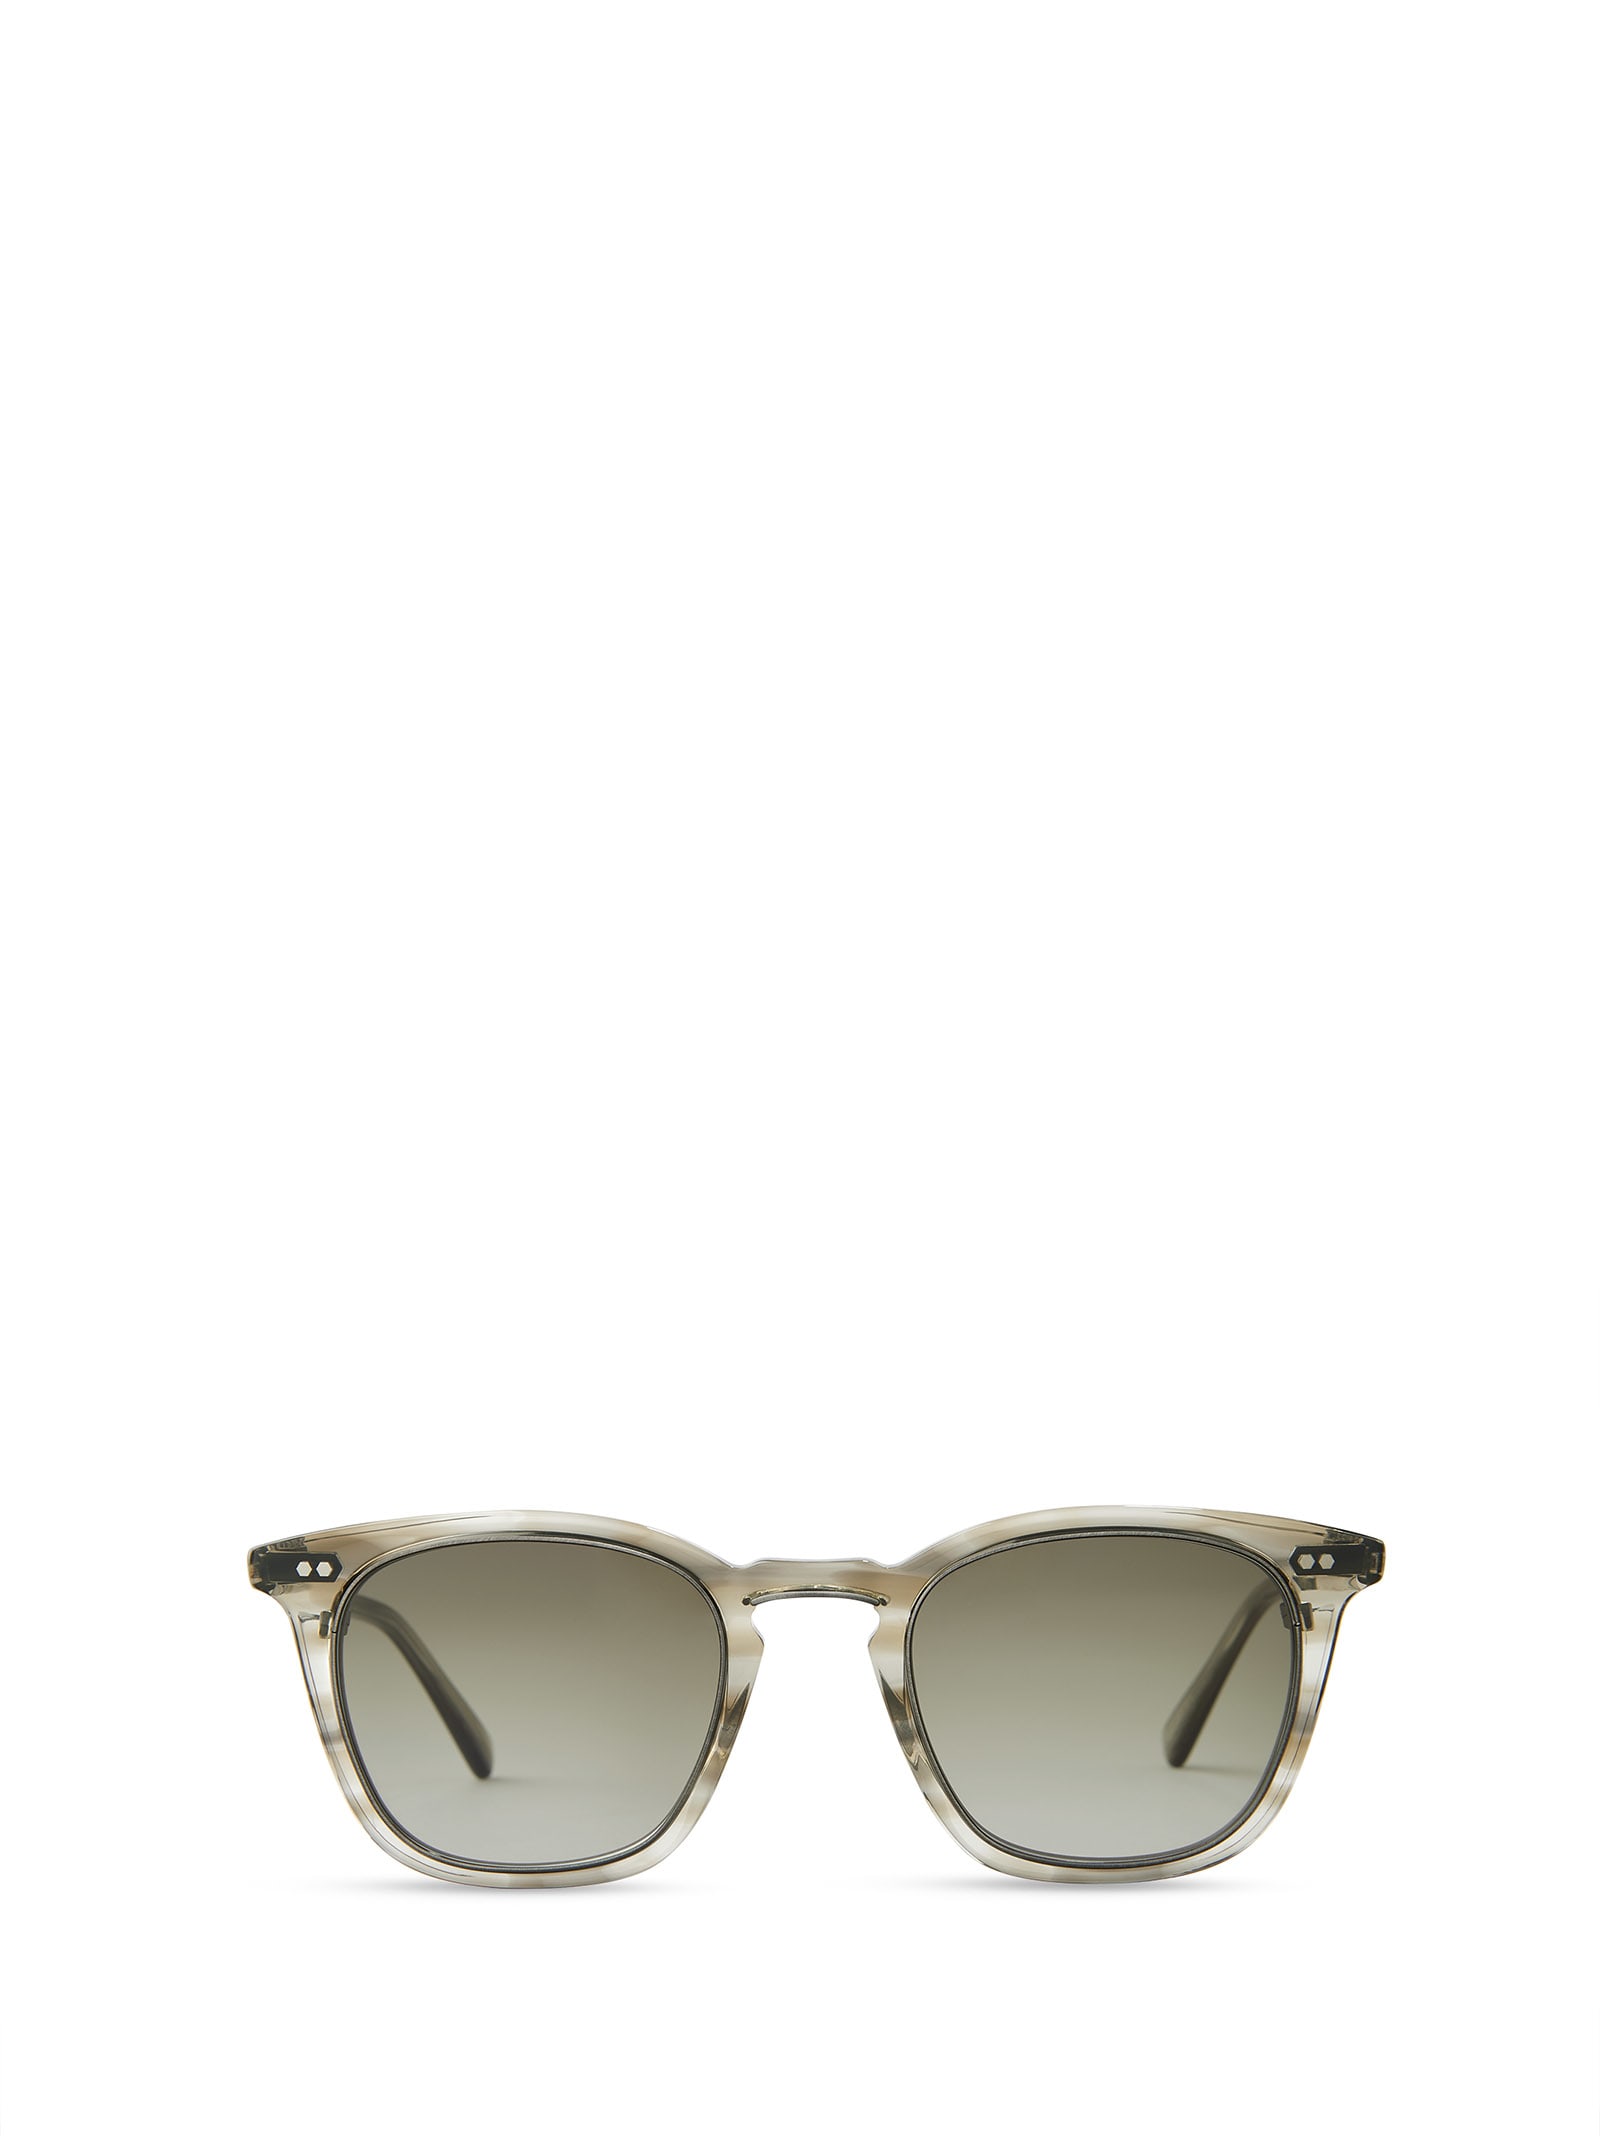 Mr Leight Getty Ii S Celestial Grey-pewter Sunglasses